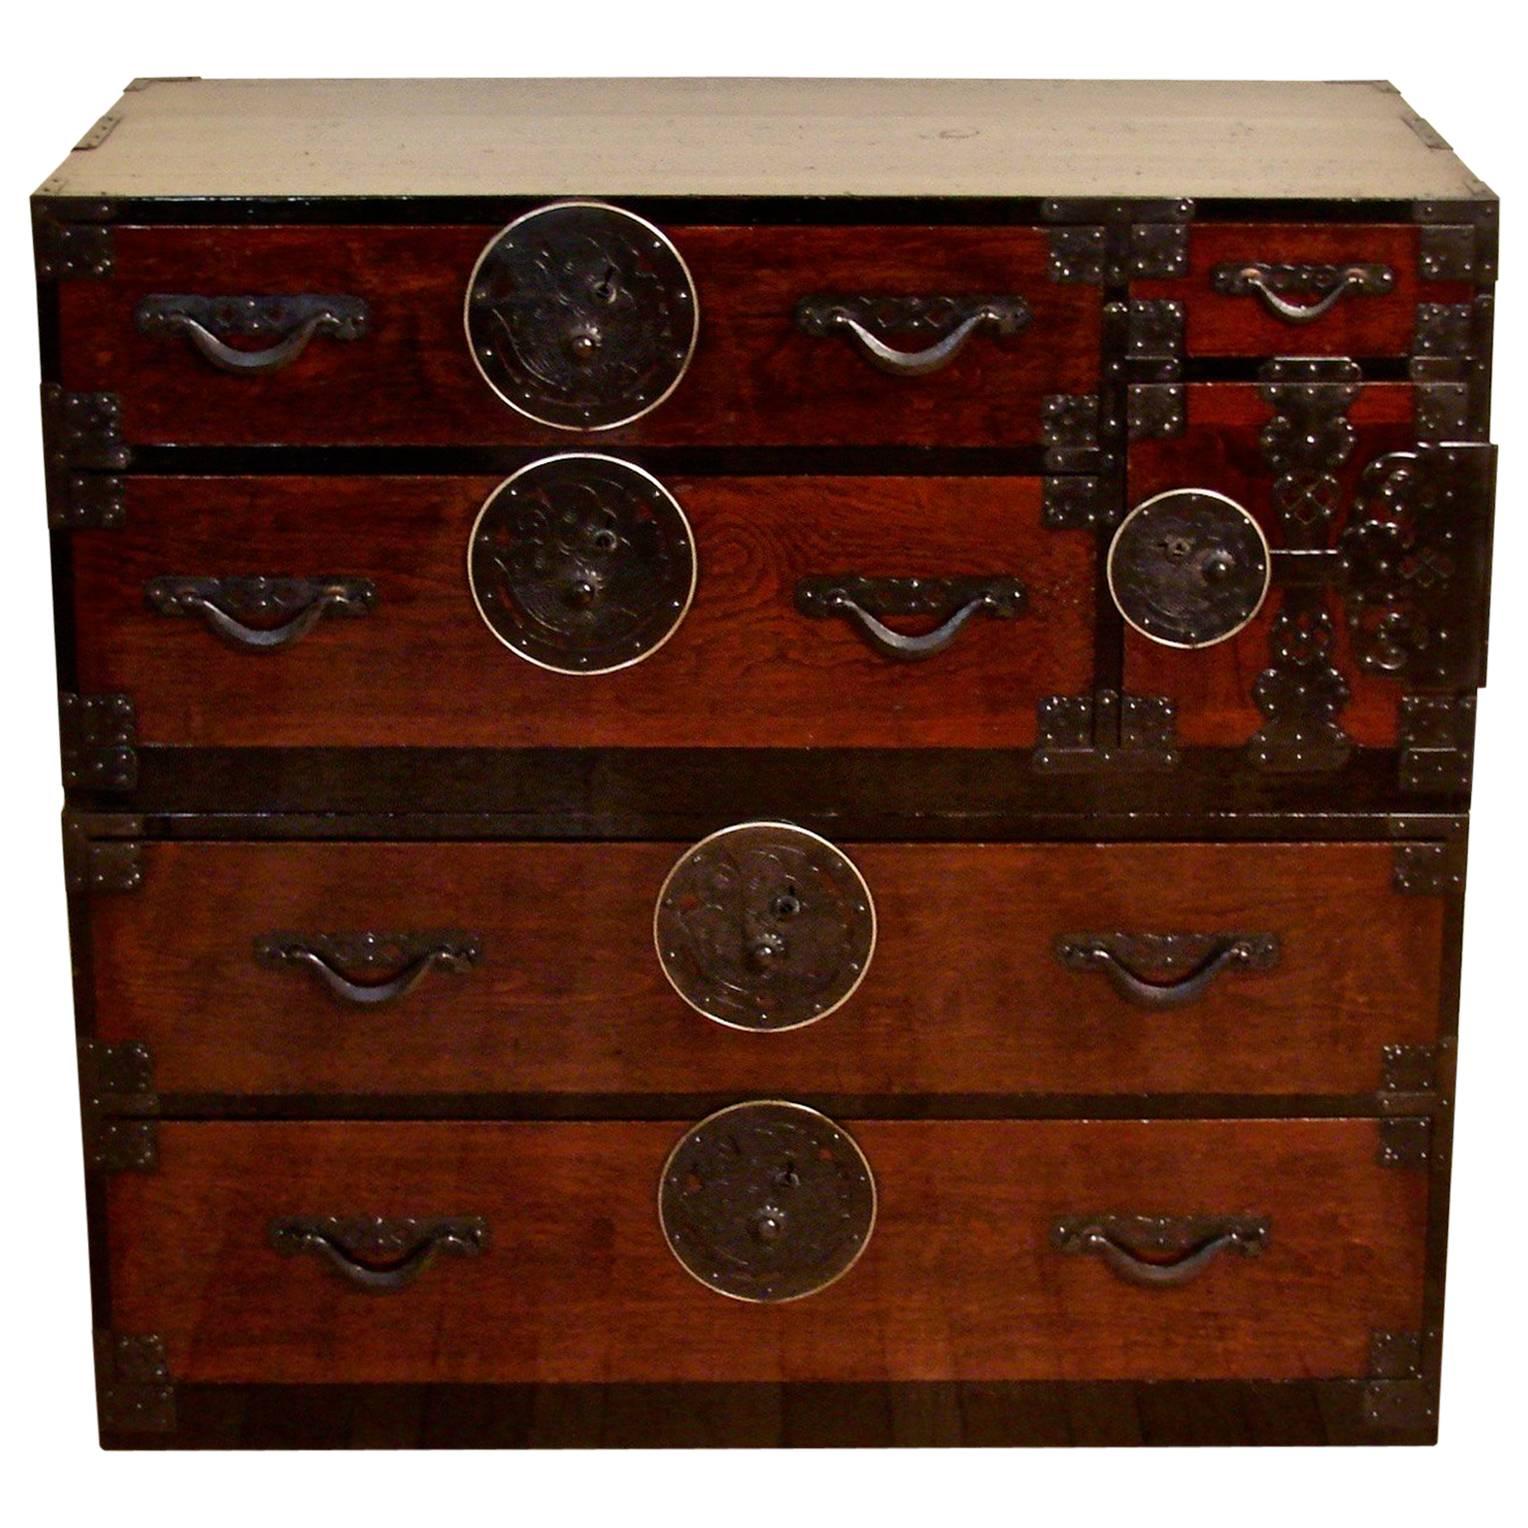 A fine Japanese Meiji period lacquered and stained choba or clothing tansu in two parts, the upper stage with two short drawers and a safe compartment containing two further small drawers, the lower section with two long drawers, the pine sides with